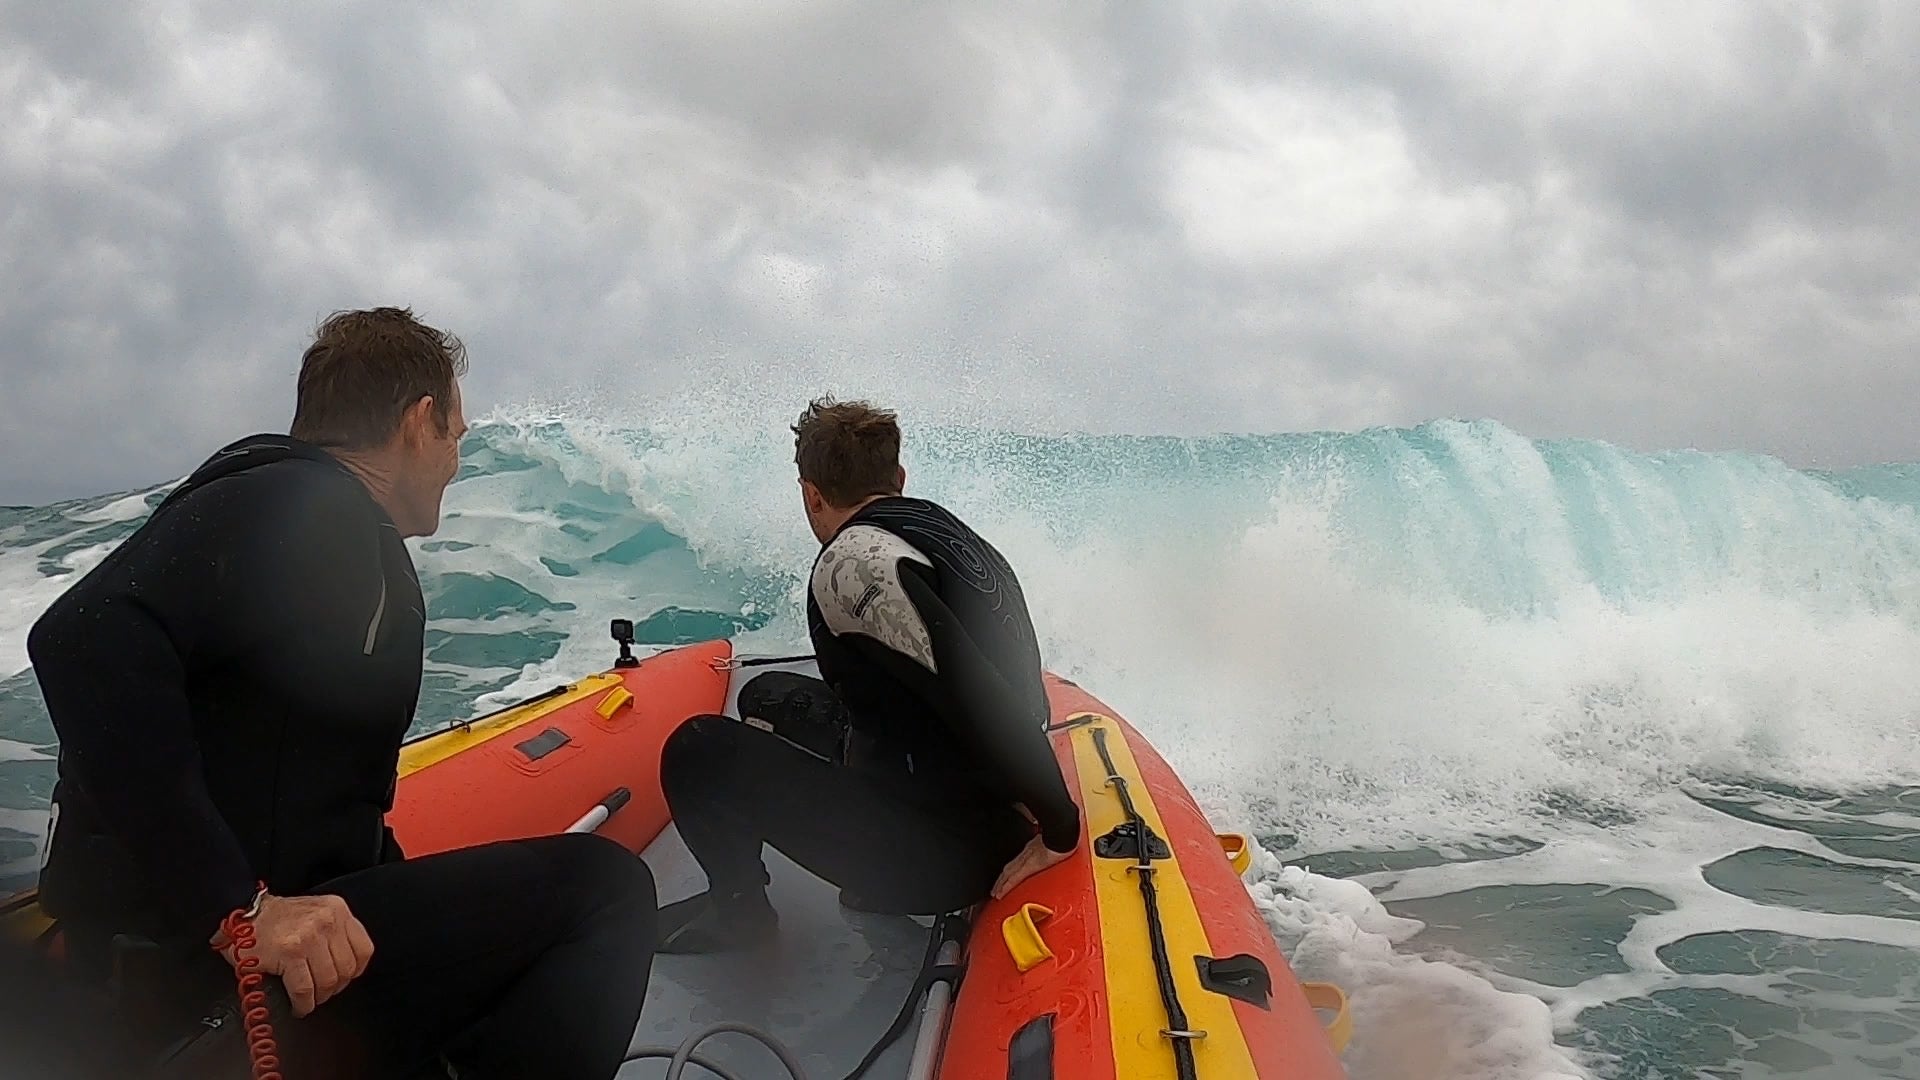 True Kit Discovery being used in big surf conditions.  Showing the stability and free draining cockpit